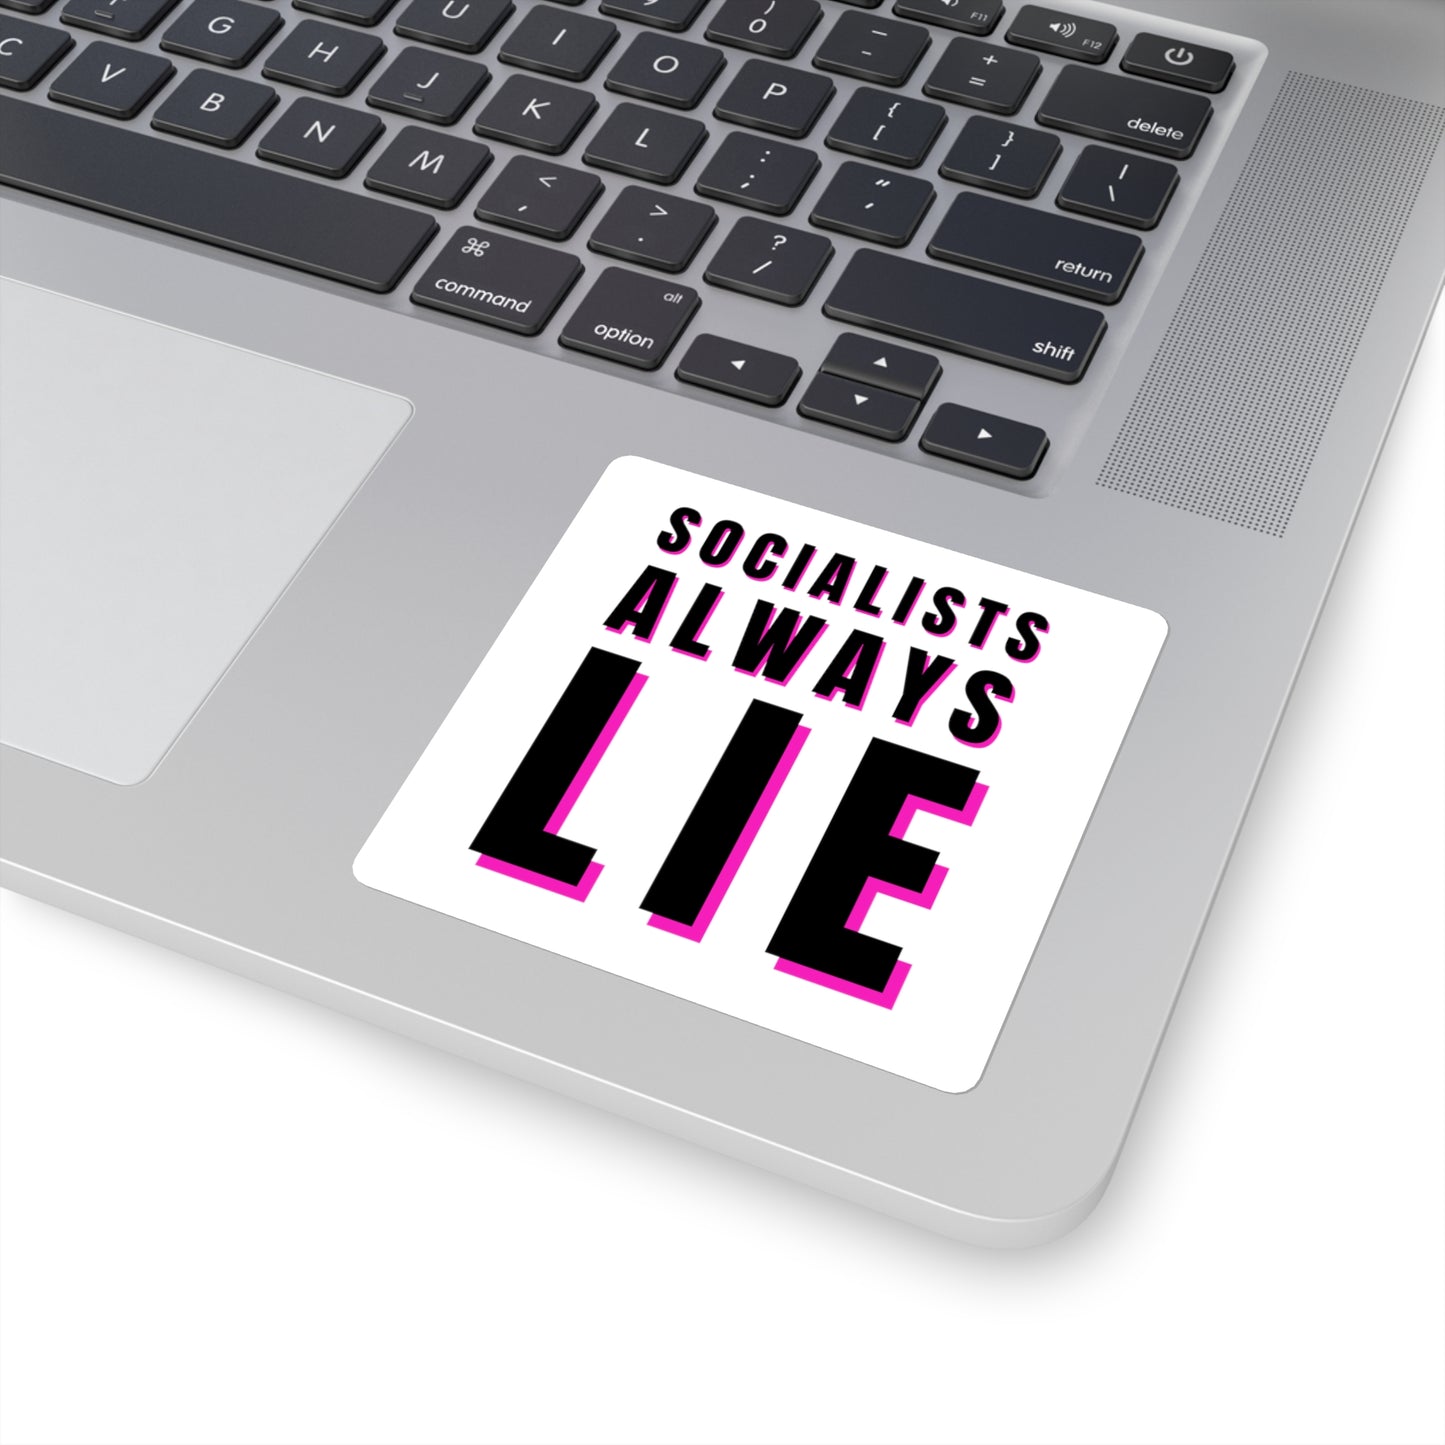 Socialists Always Lie Square Stickers